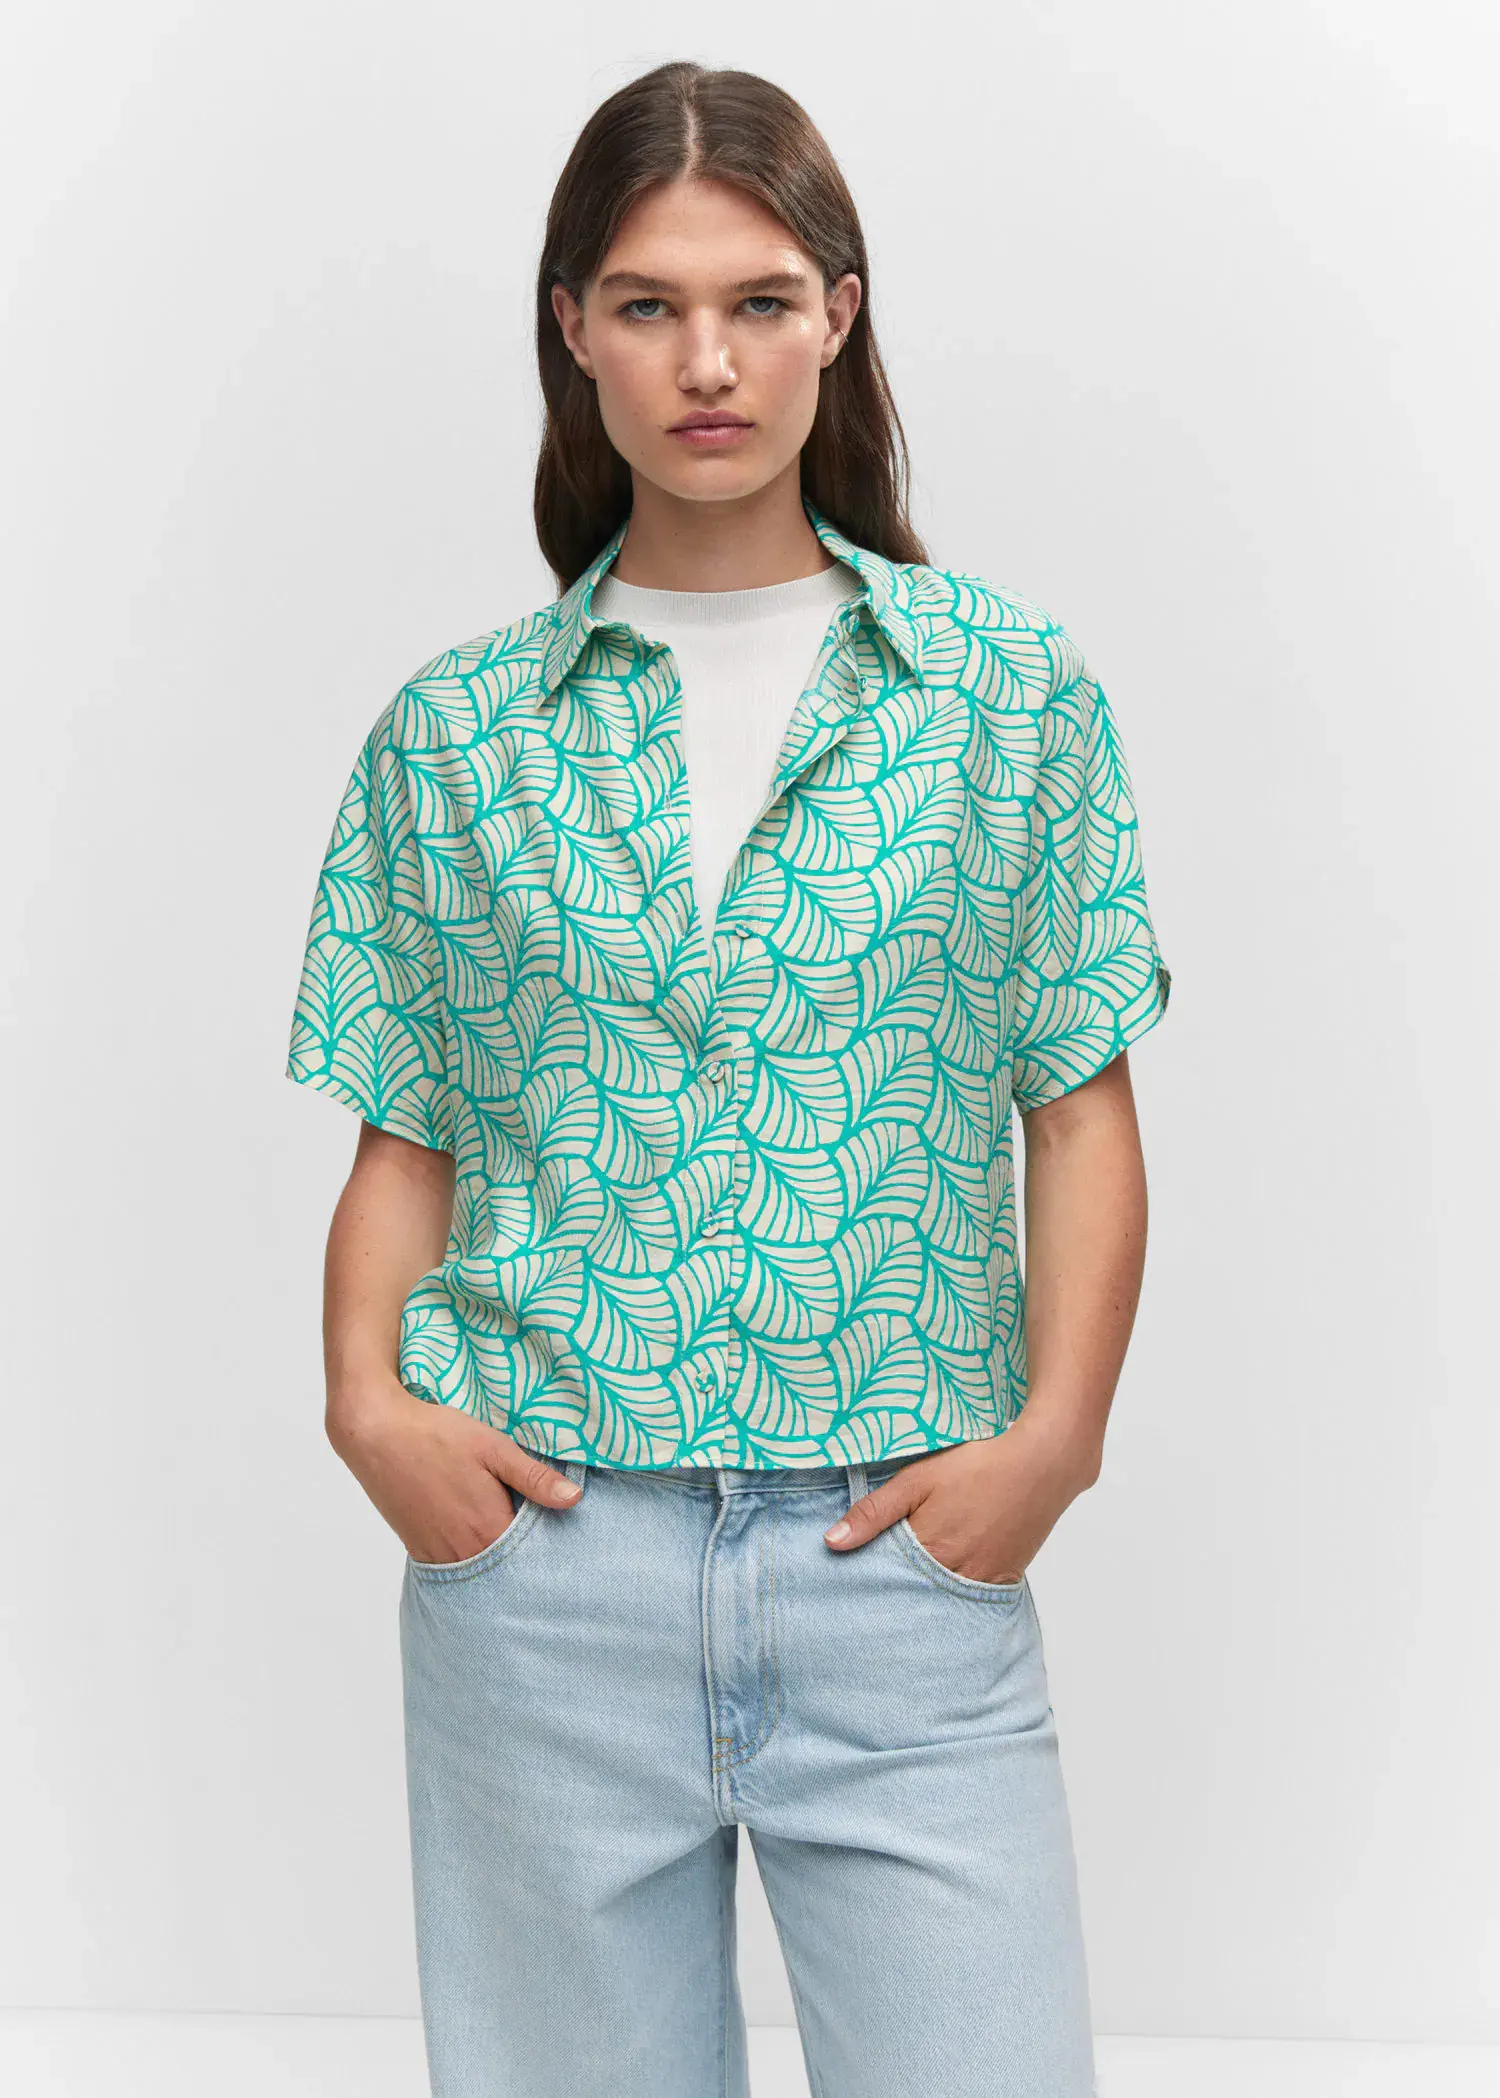 Mango Buttoned printed shirt. a woman wearing a green and white leaf patterned shirt. 